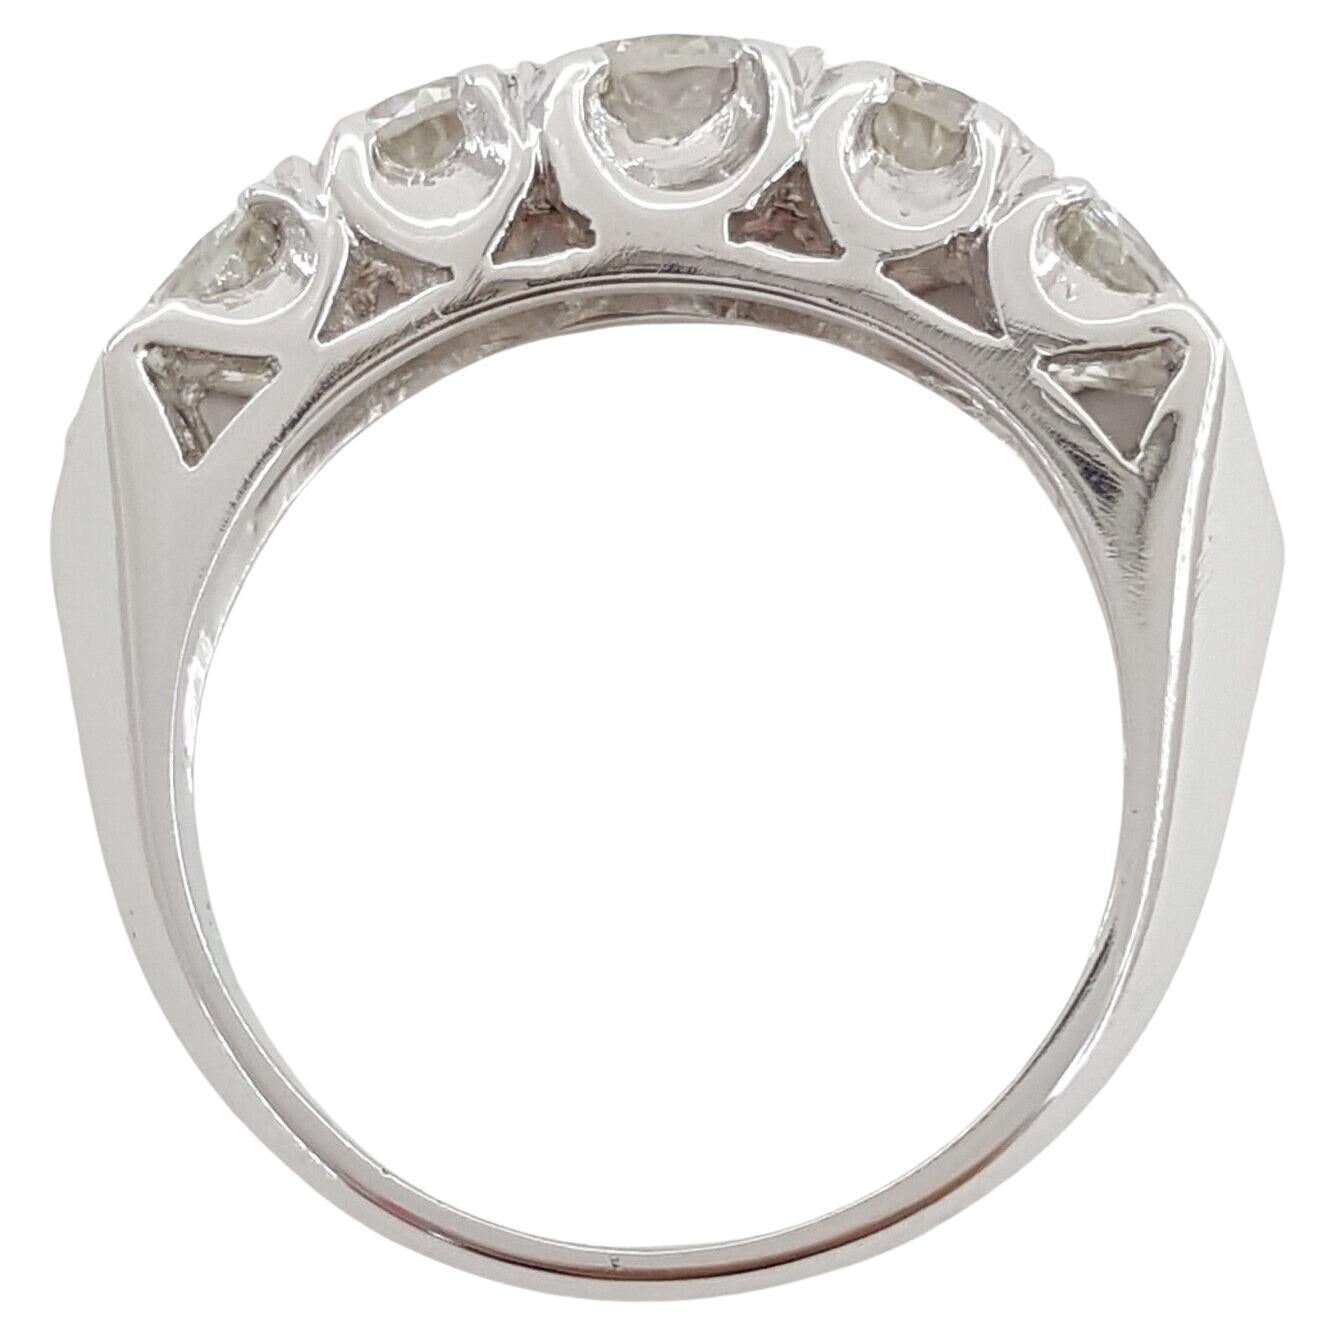 Contemporary 1950's 1.80 Carat Round Diamond Band Ring For Sale